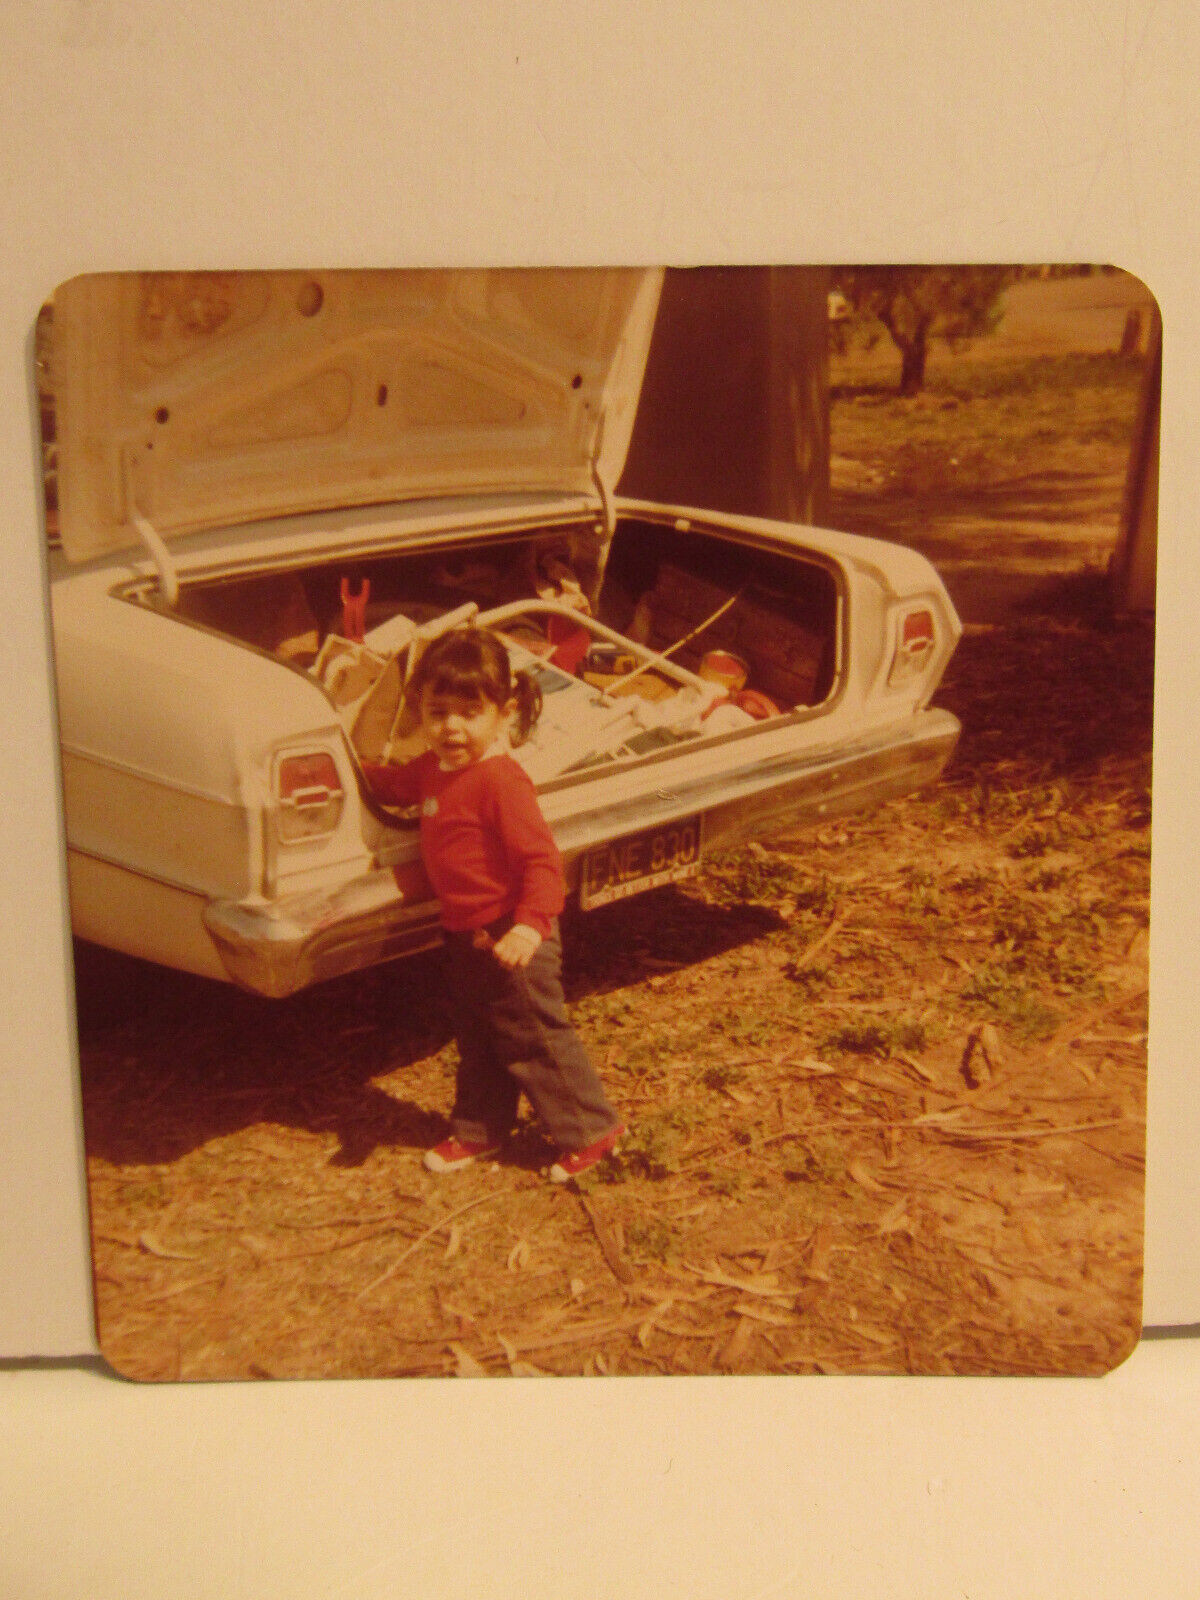 VINTAGE FOUND PHOTOGRAPH COLOR ART OLD PHOTO 1981 TODDLER GIRL MESSY CAR TRUNK